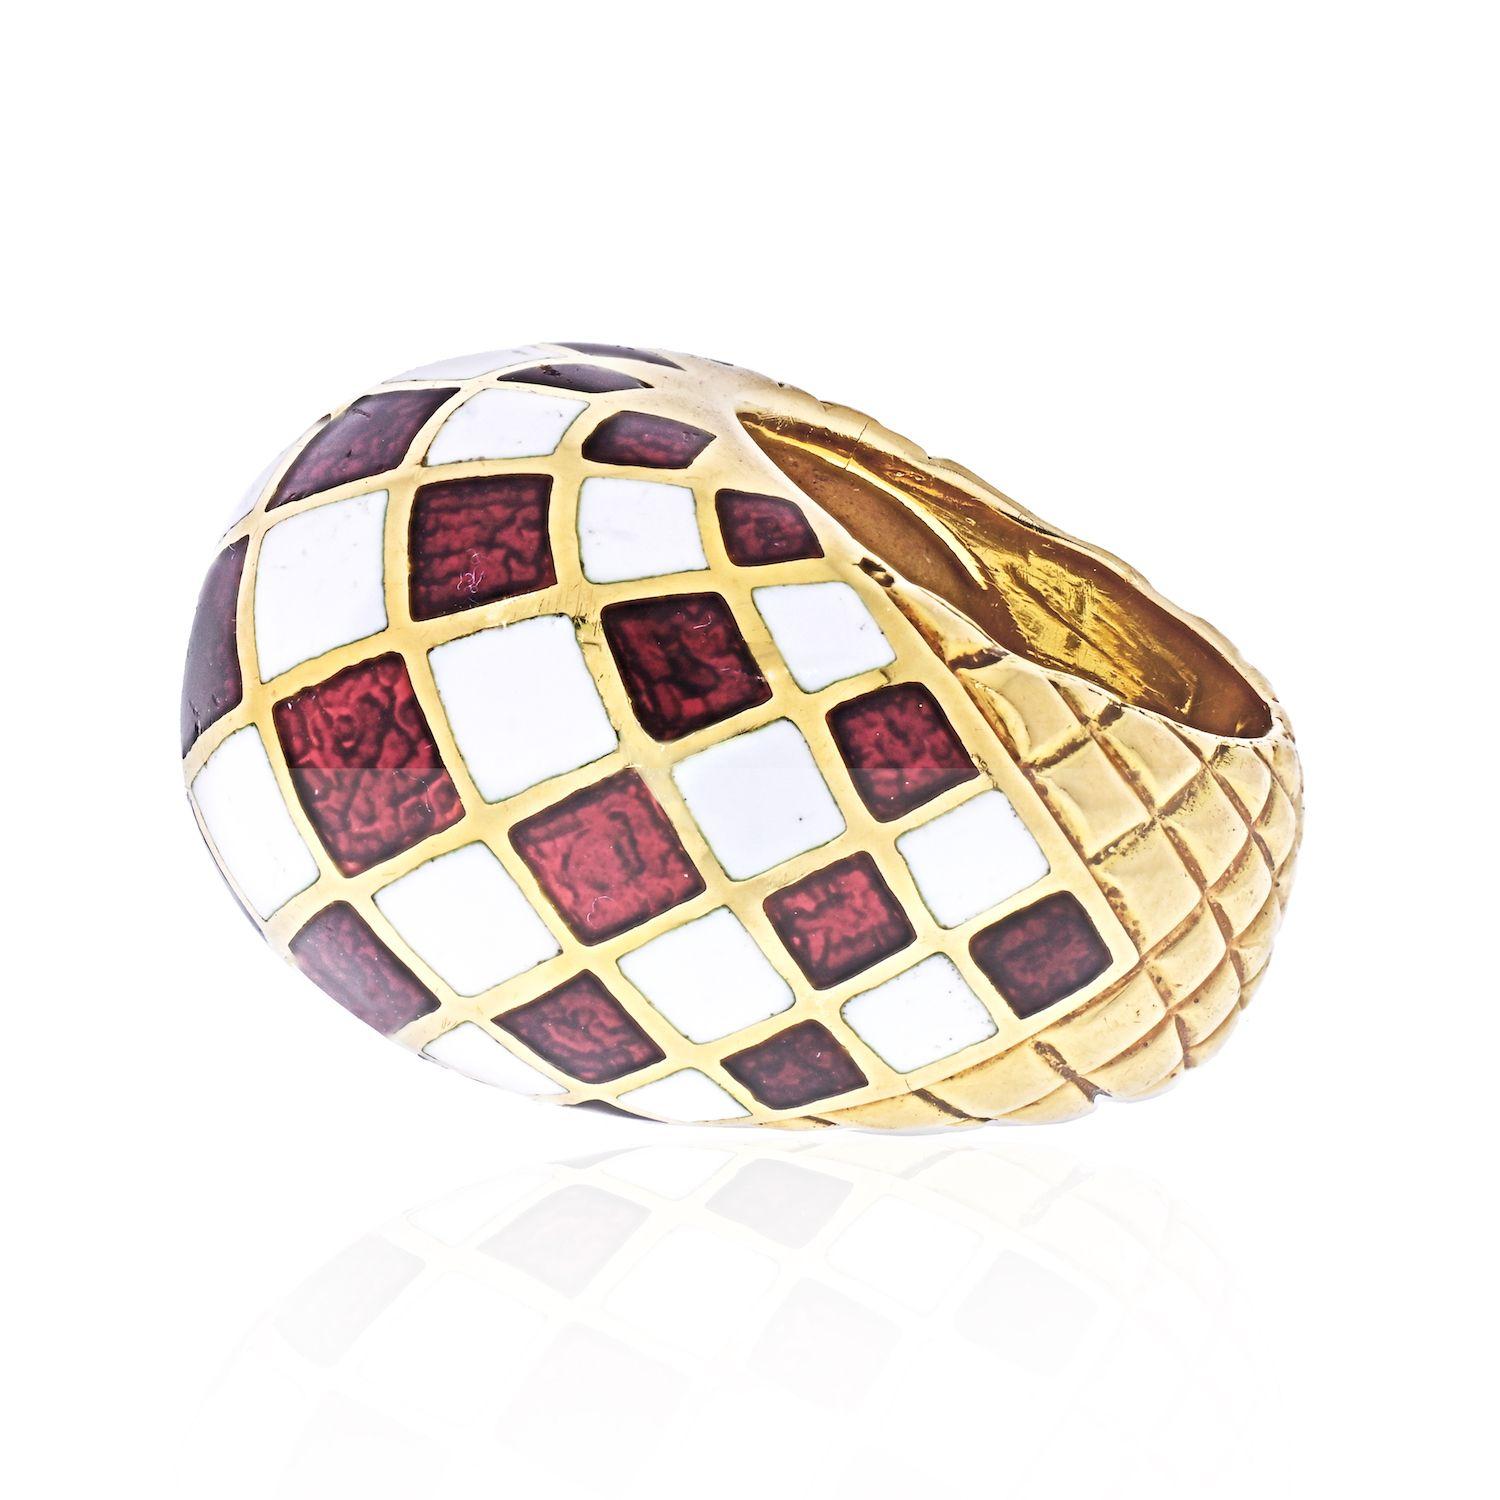 The large domed top with dark red and white enamel checkerboard design, to a tapering textured gold band in 18k. Signed David Webb.
As with every David Webb ring the sizing horse shoe bar that is made of platinum, located inside the ring allows this